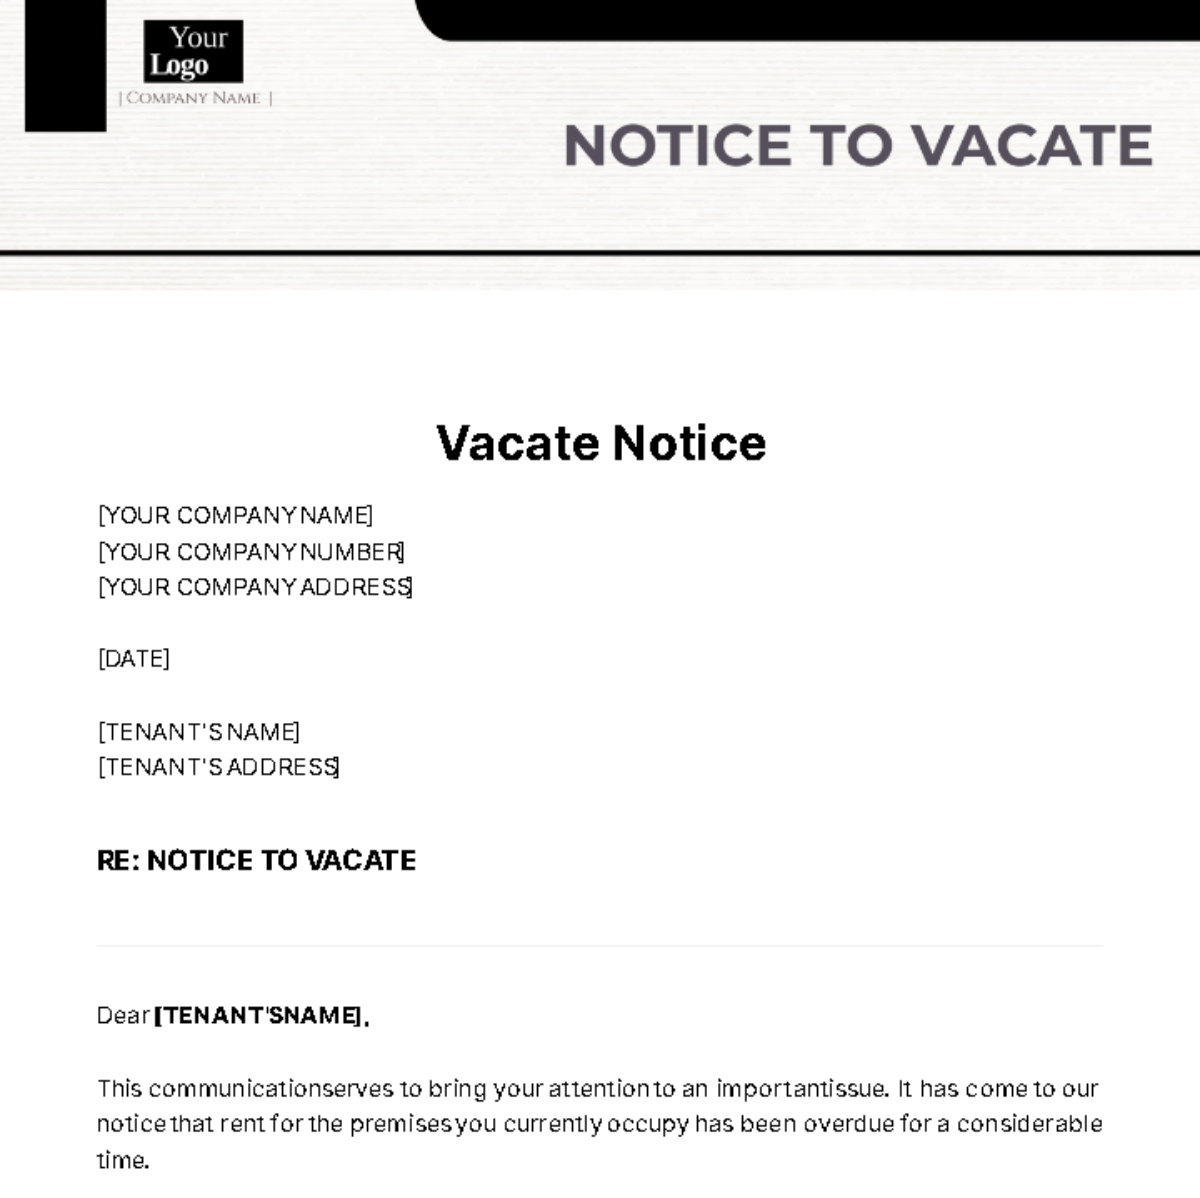 Notice To Vacate Template